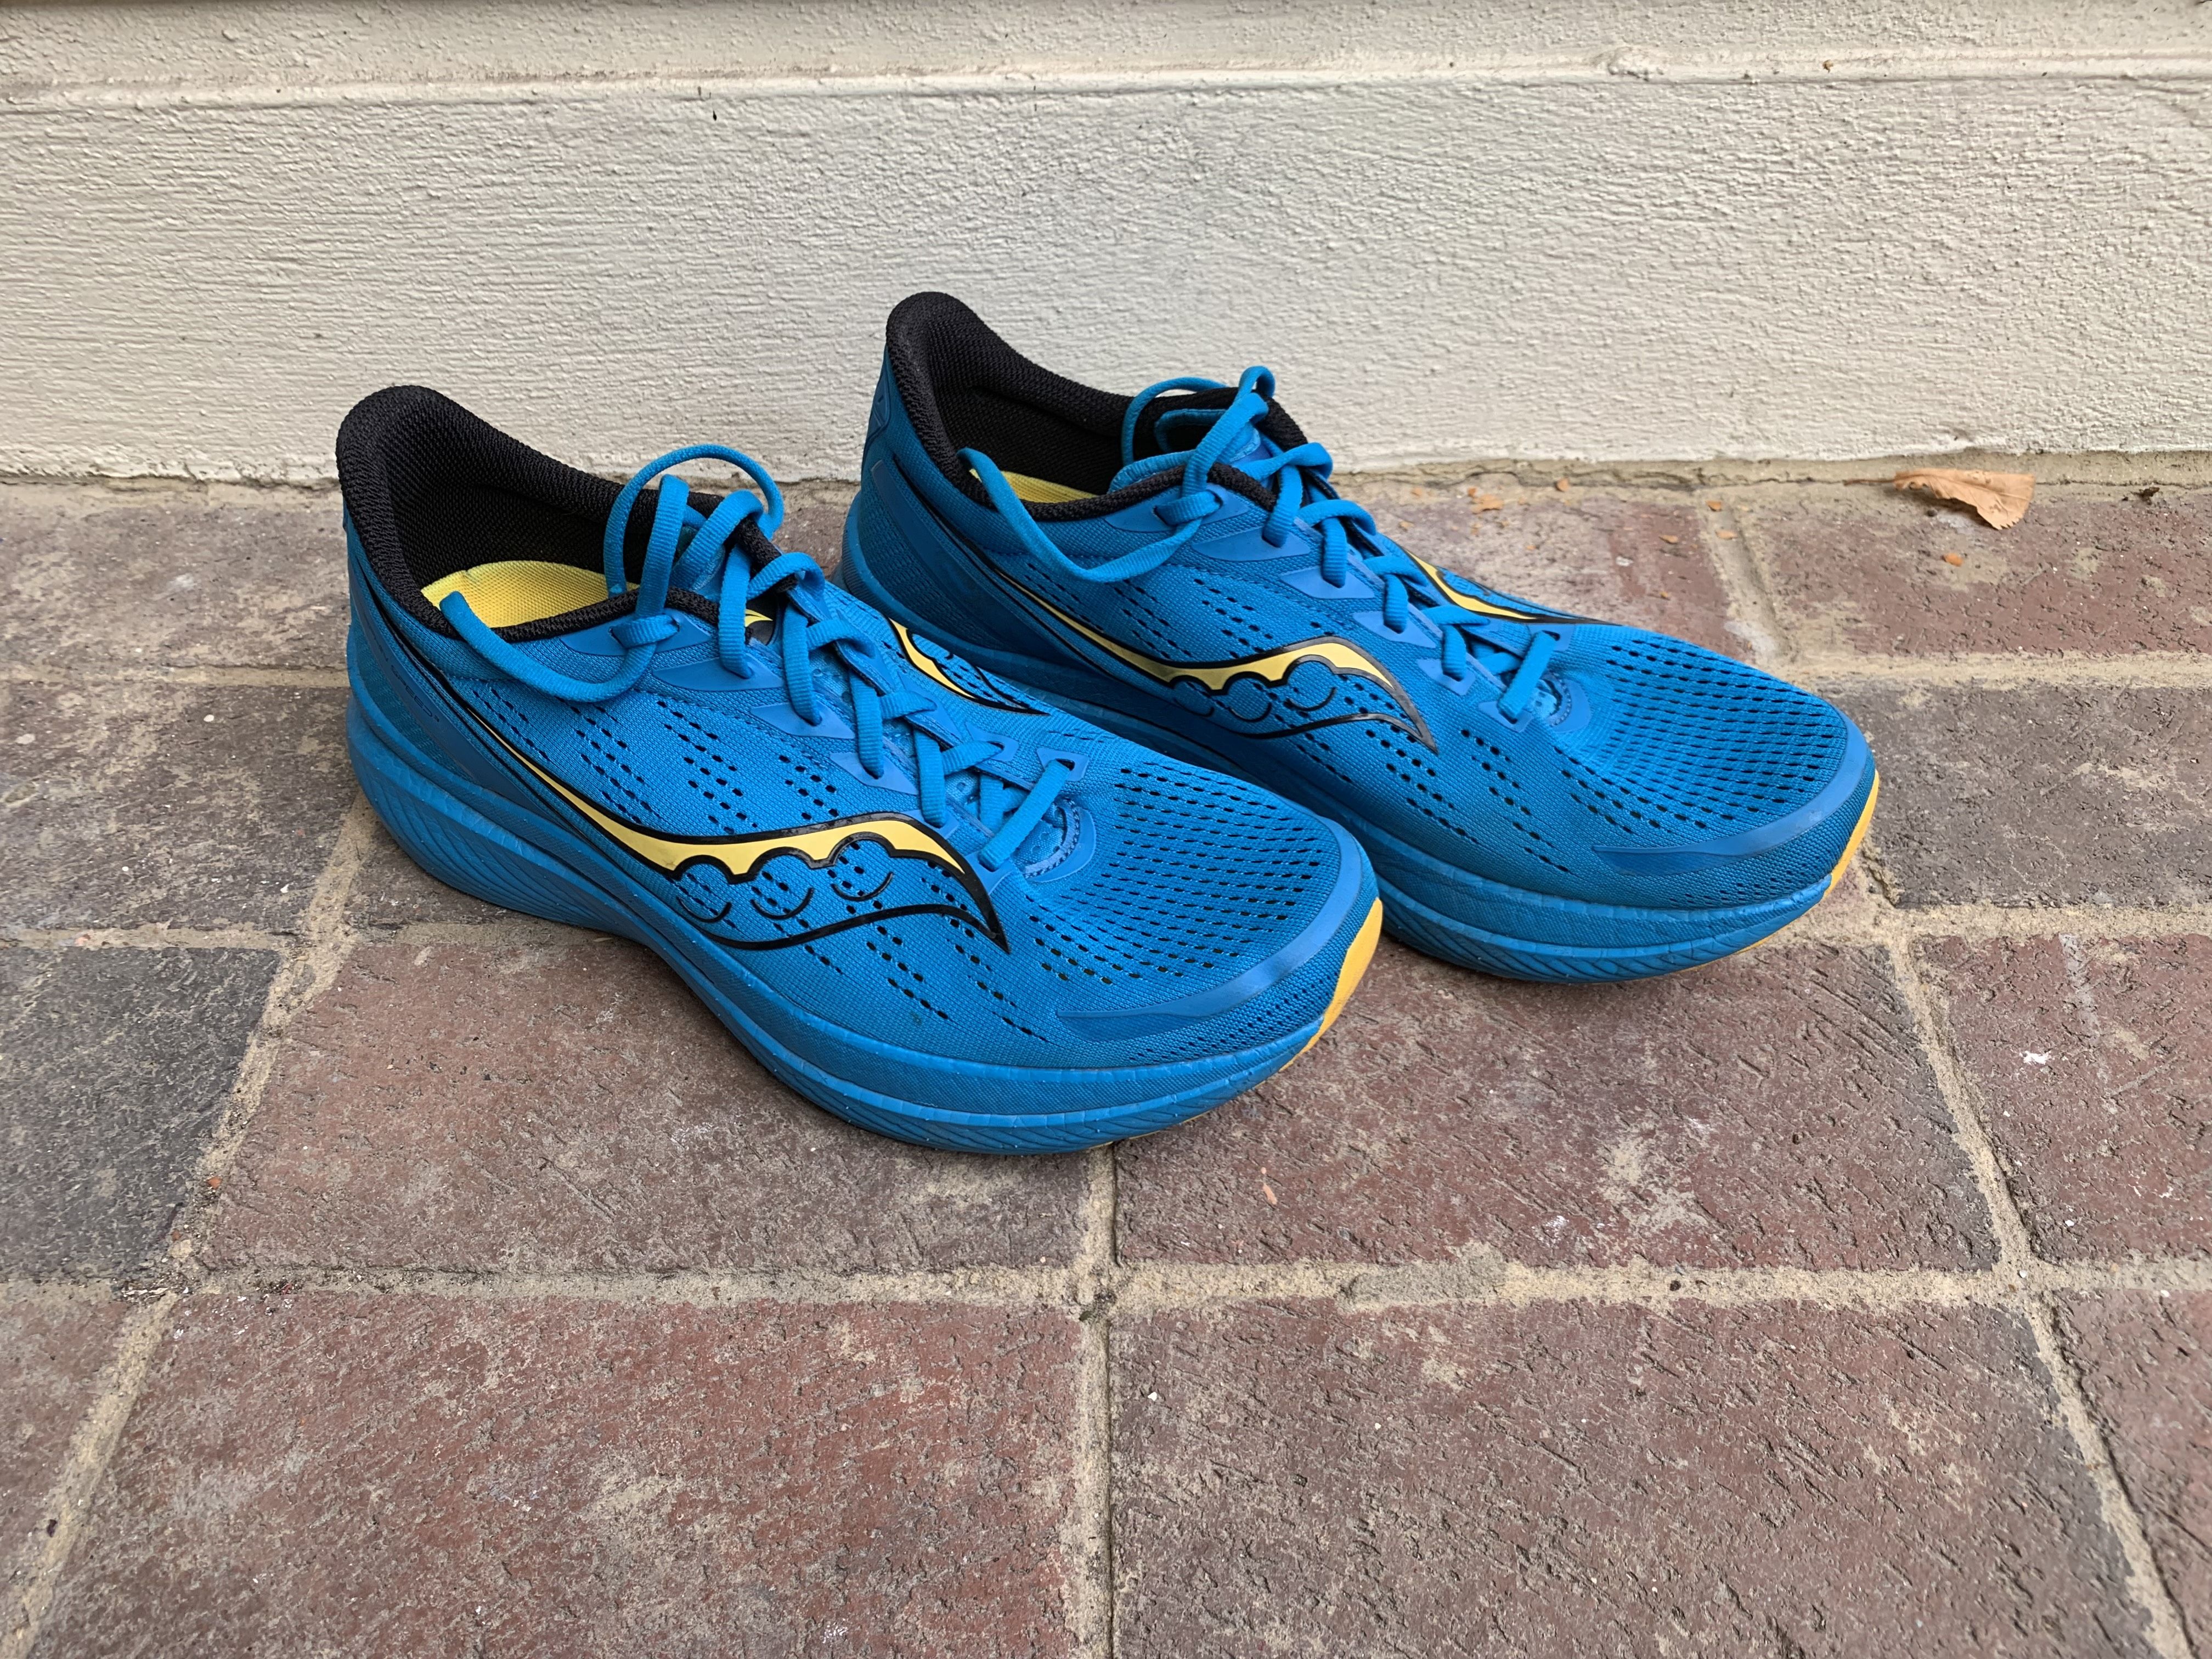 Saucony Endorphin Speed 3: Tried and tested